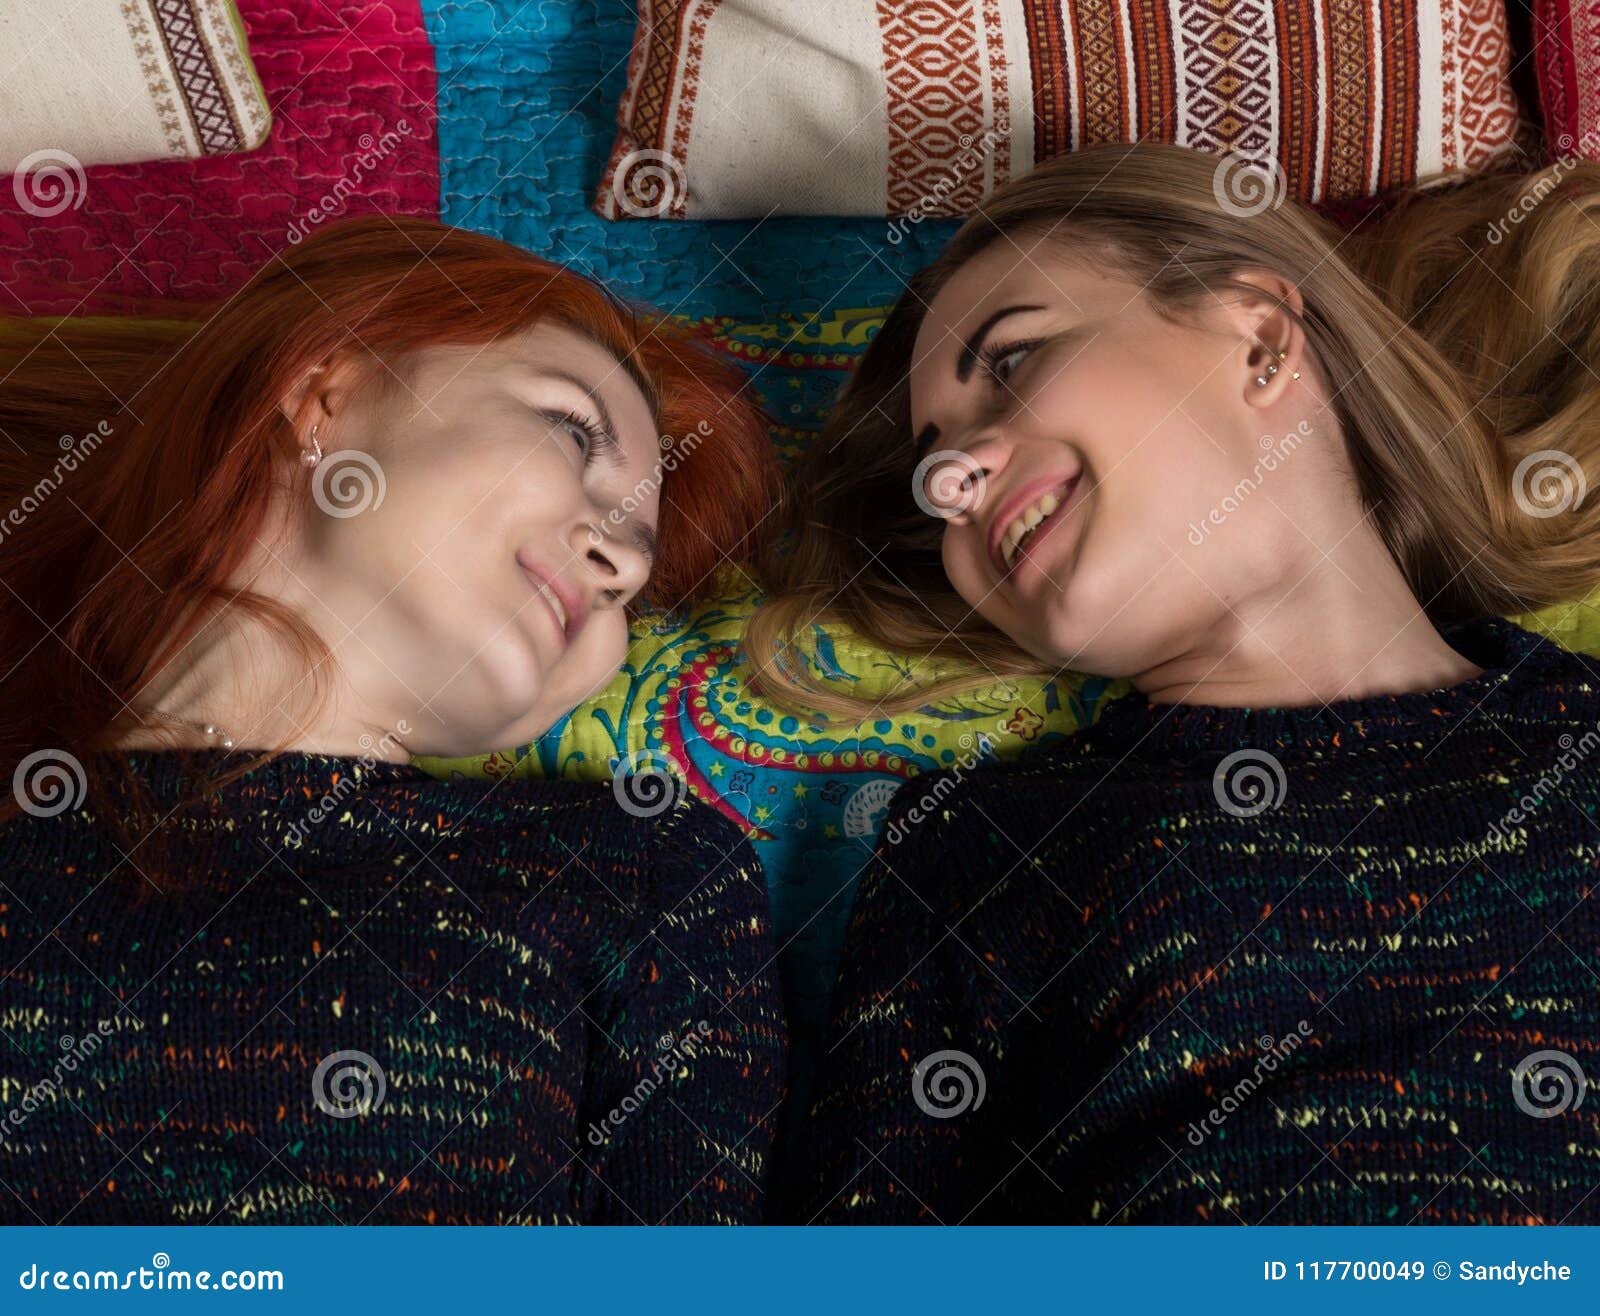 Two Pretty Lesbians Girlfriends Kissing And Hugging In A Cozy